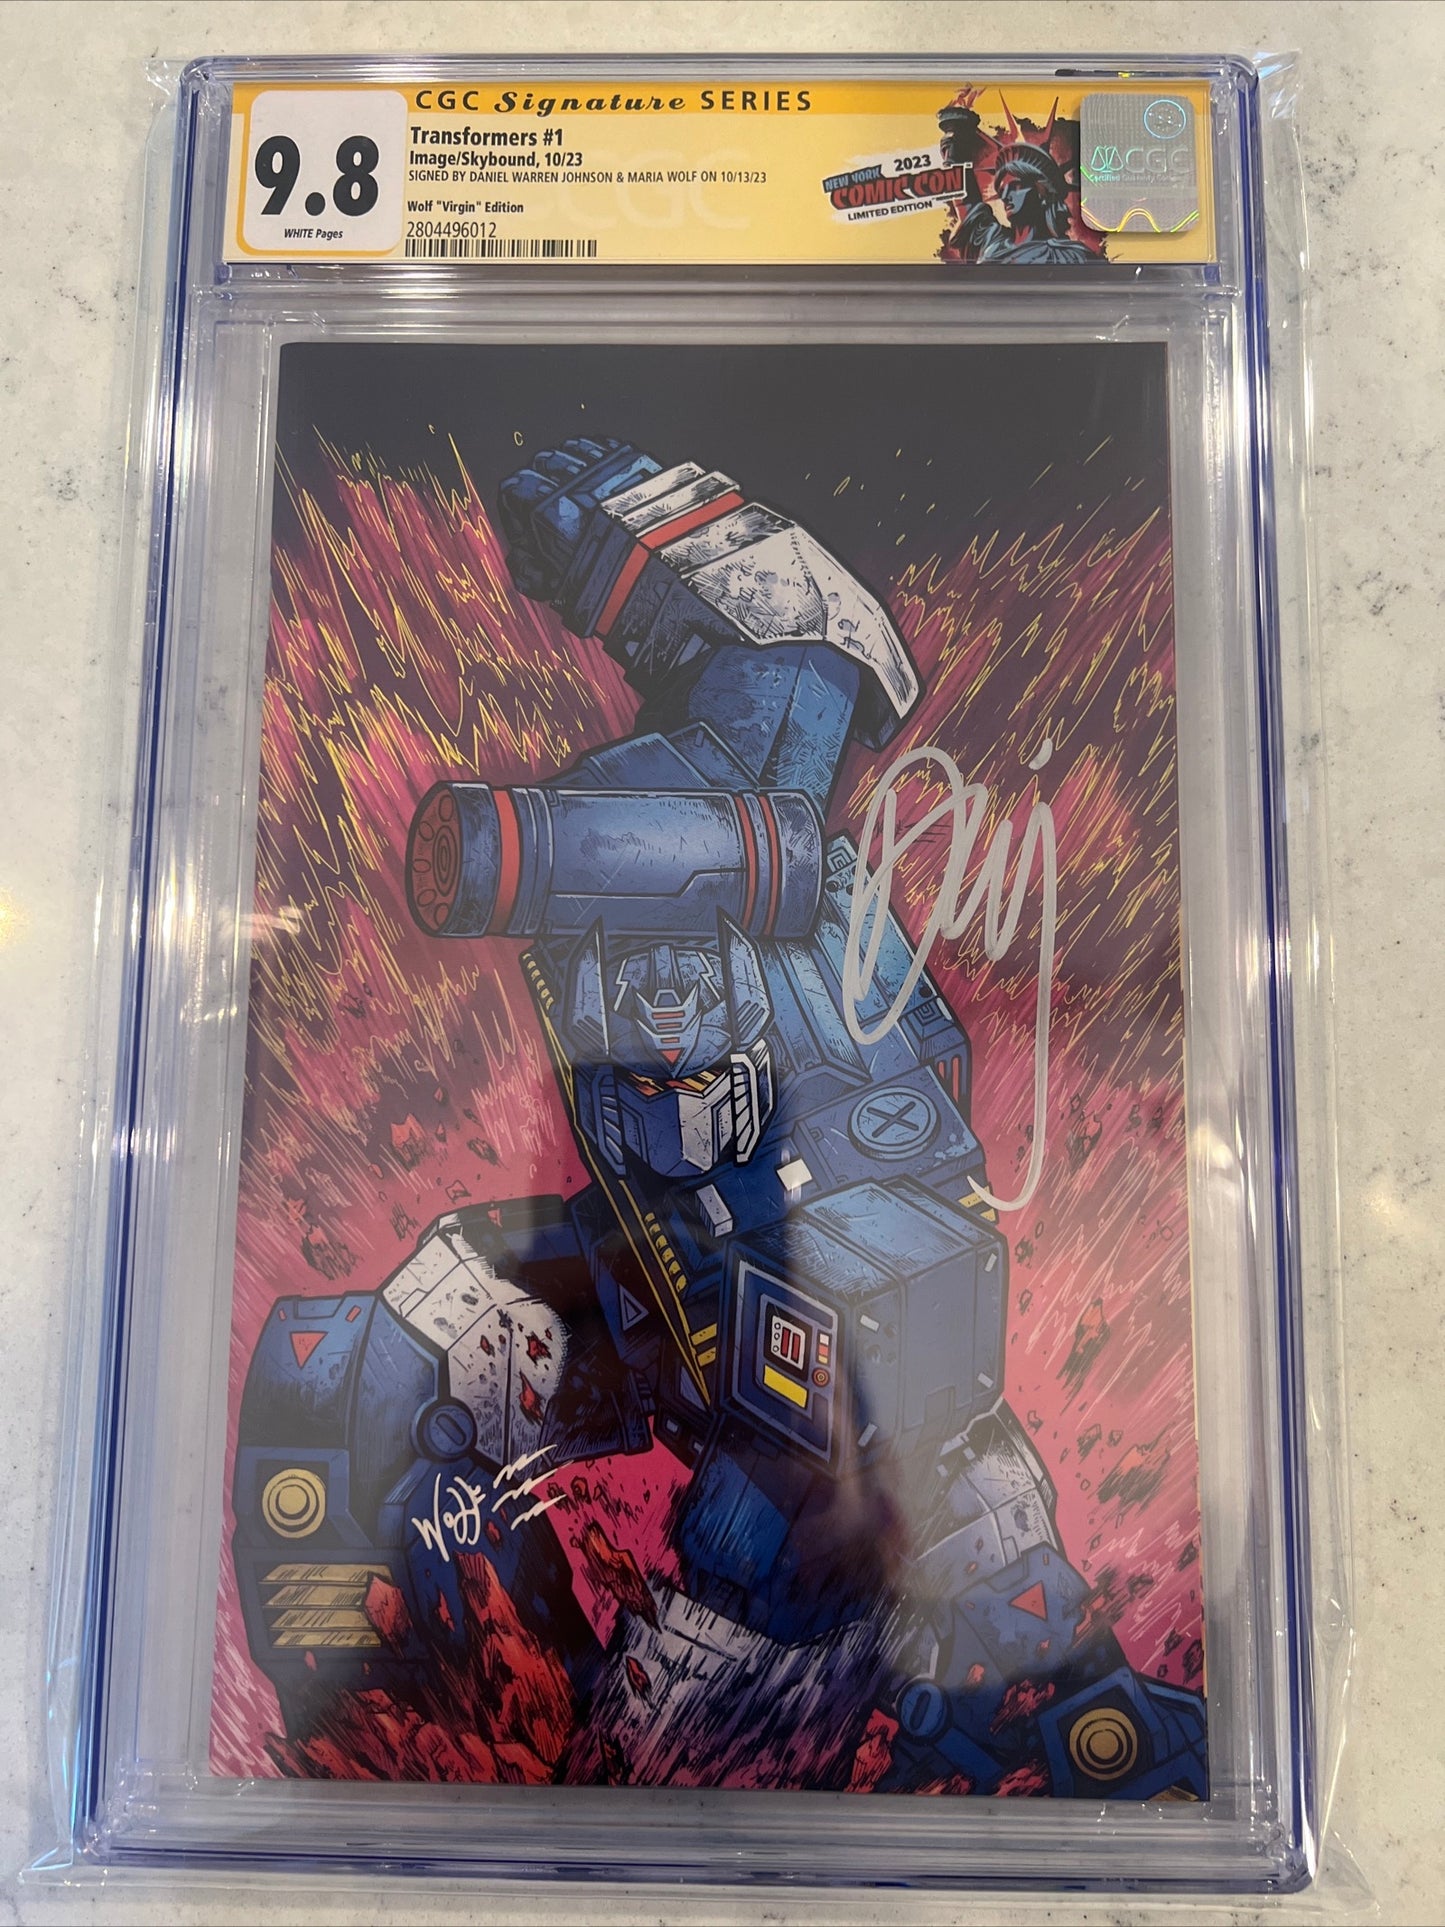 Transformers #1 (Image/Skybound) CGC SS 9.8 (Maria Wolf Virgin Cover) signed by Daniel Warren Johnson and Maria Wolf